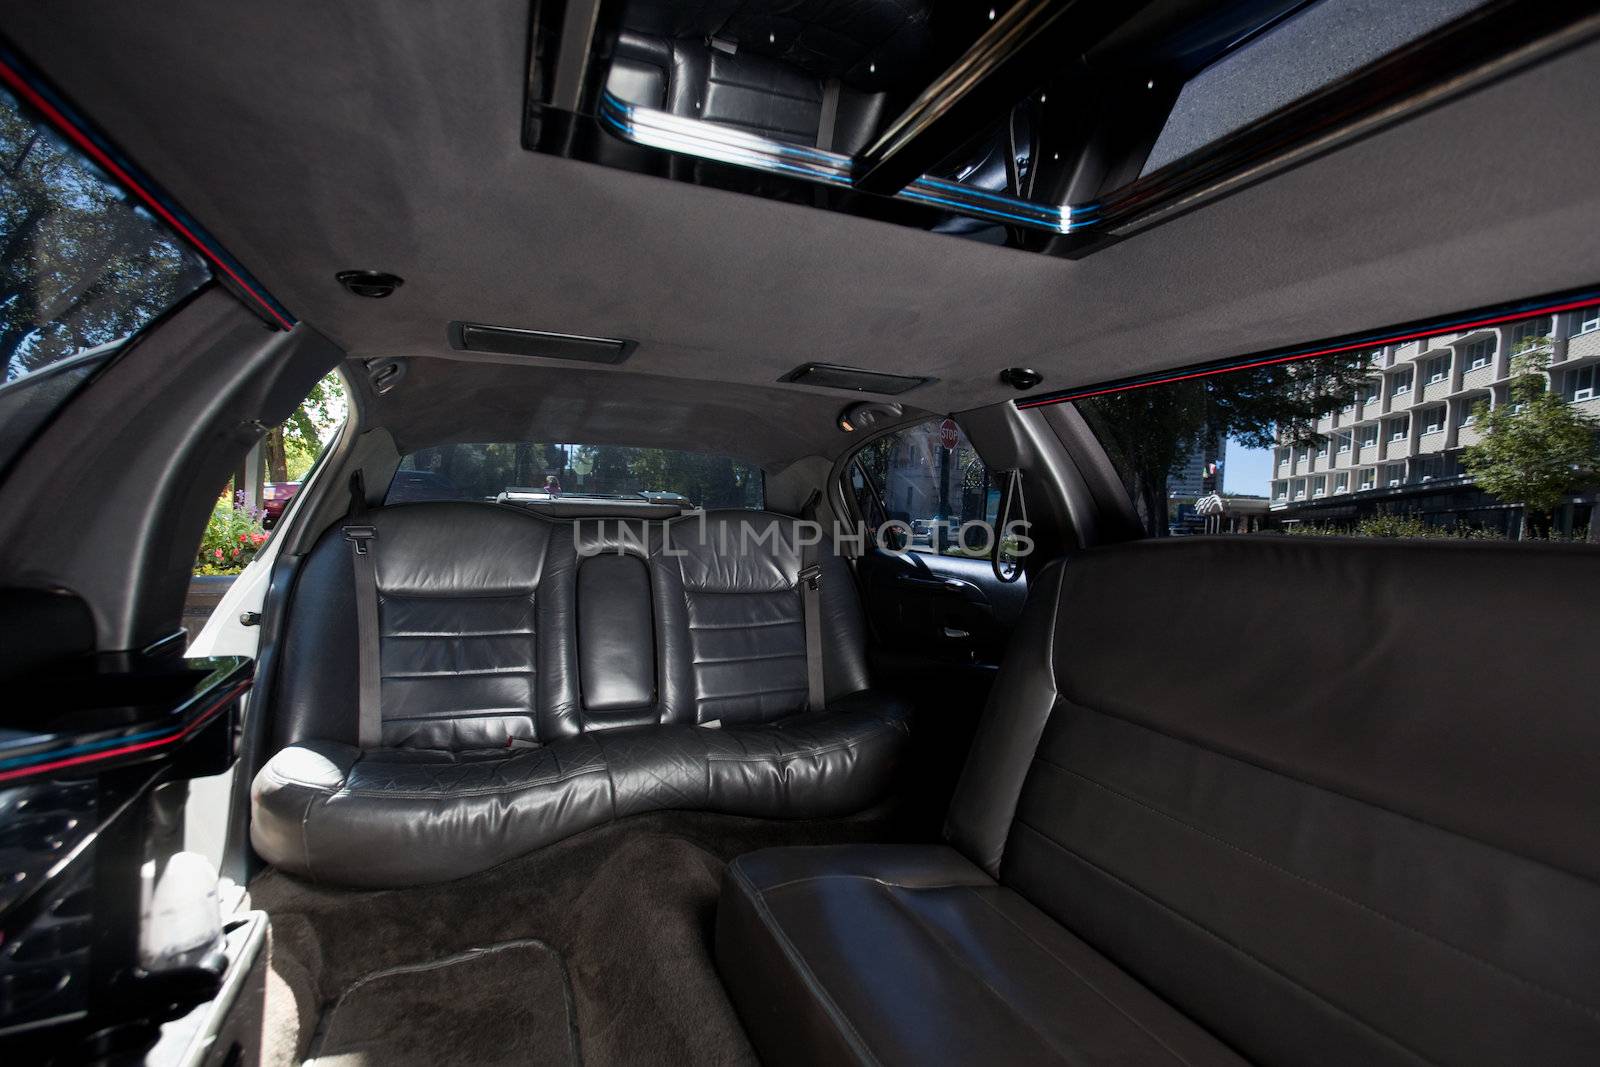 Detail shot of a limousine interior with black leather